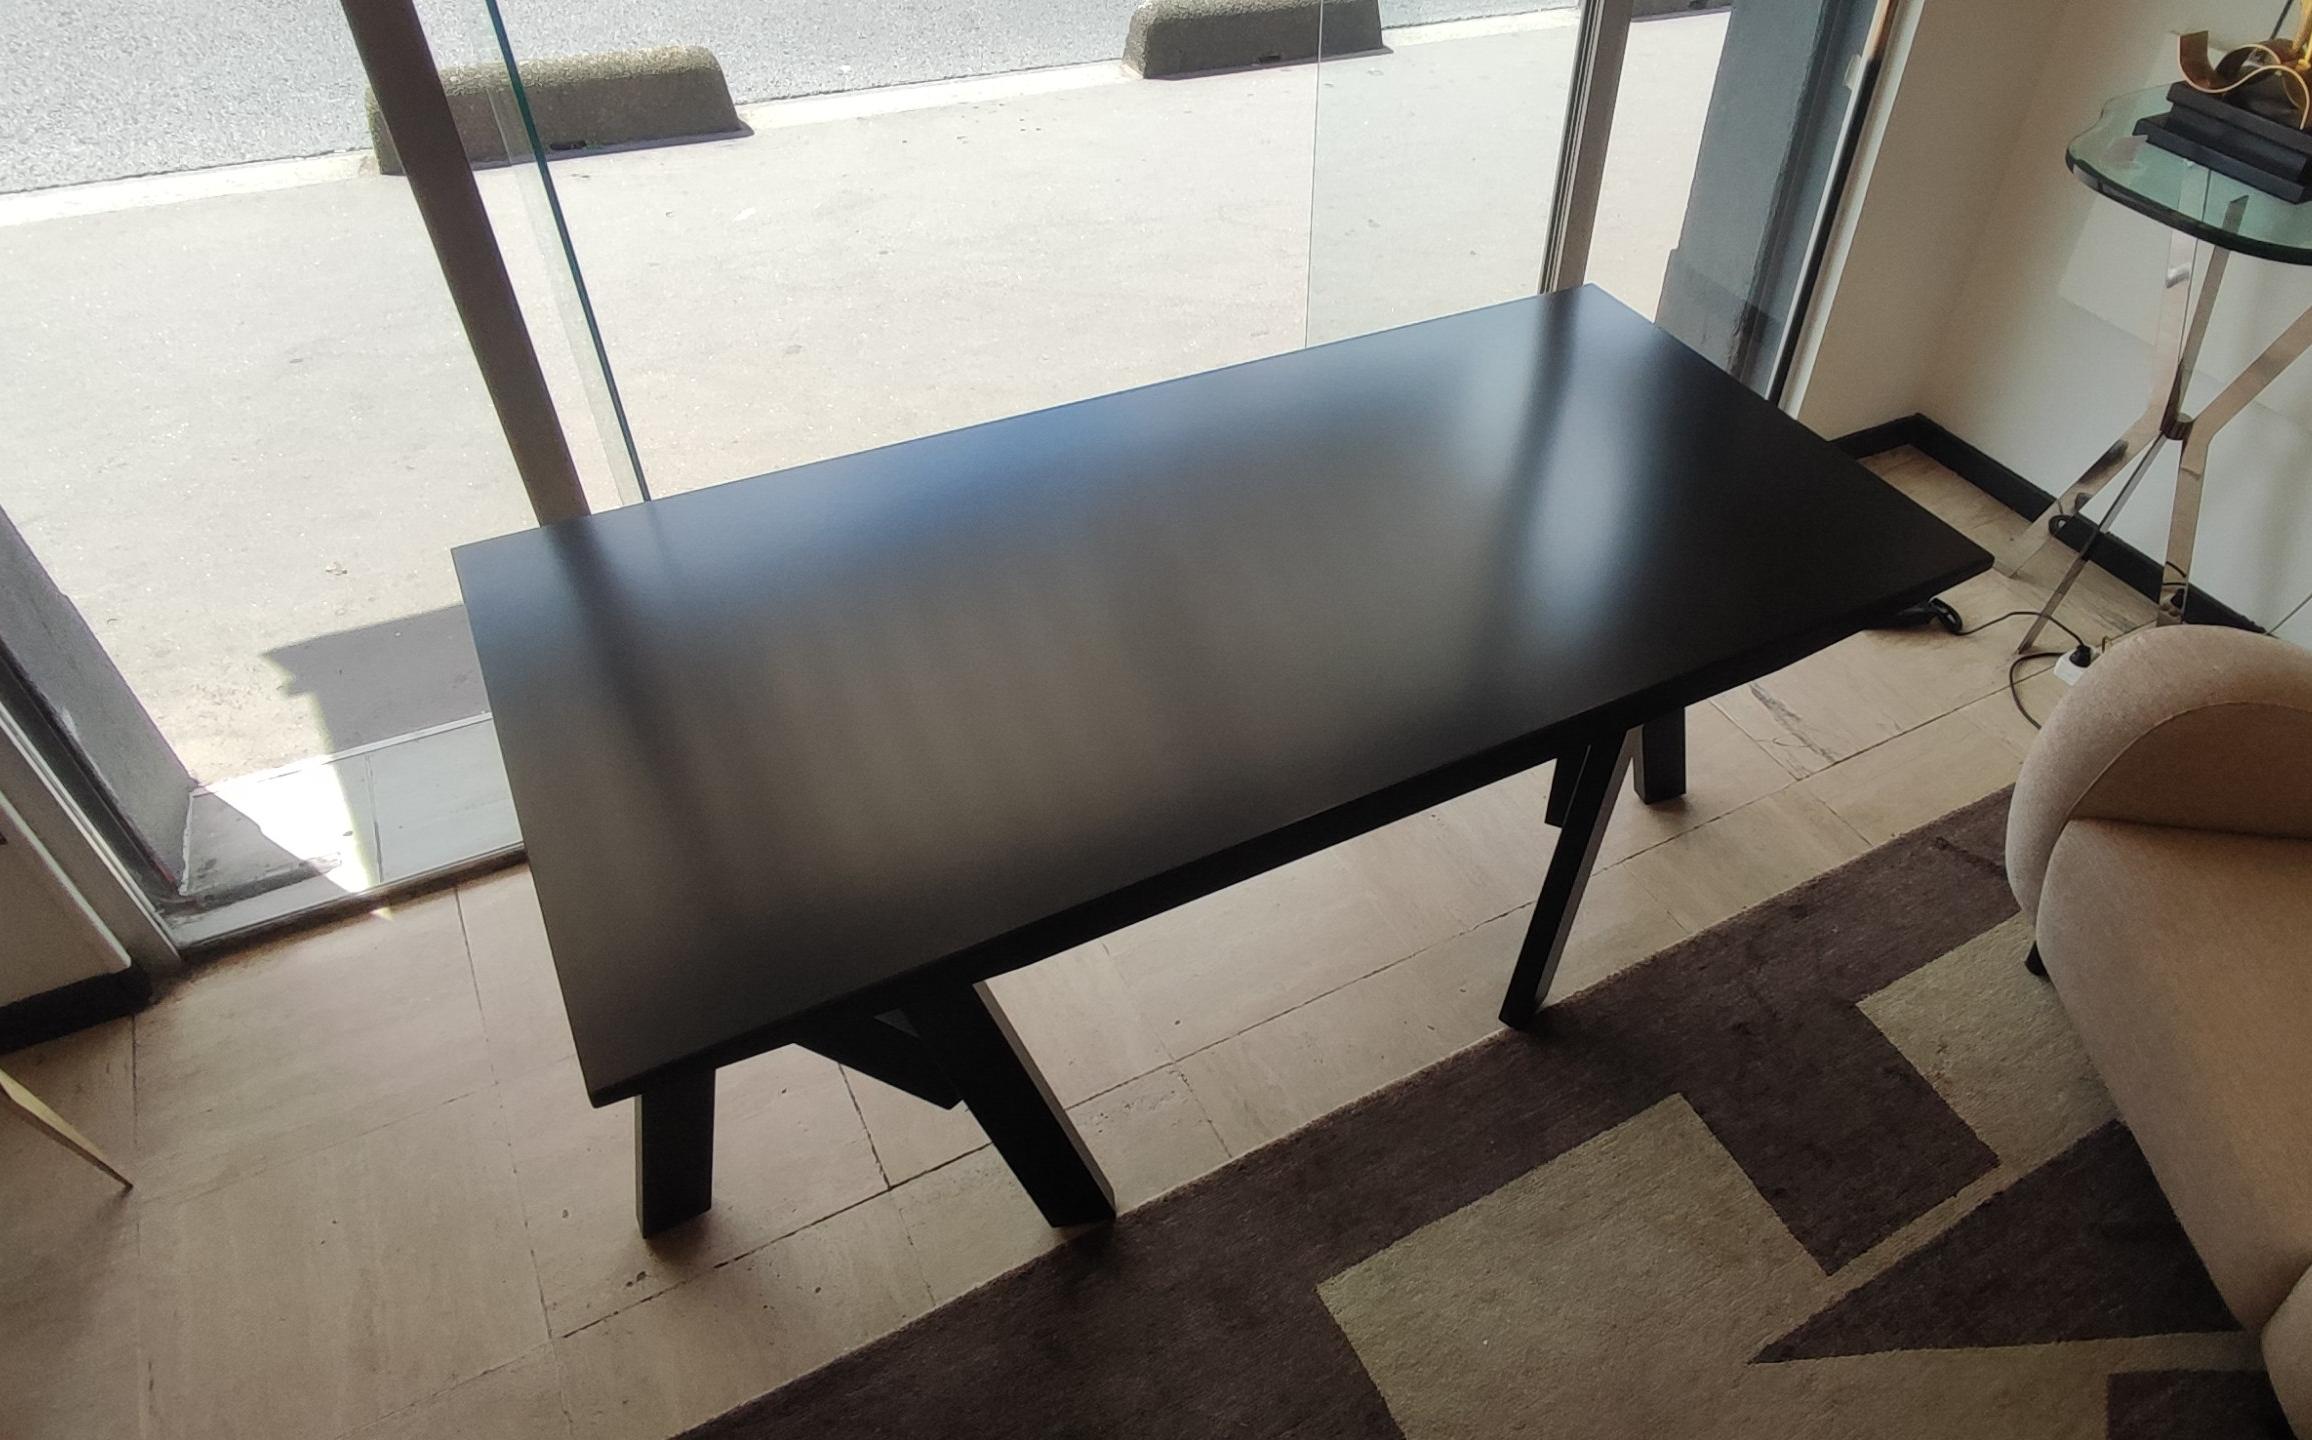 Table, original design, in oxidized steel and black patina by Stephane Ducatteau, signed, very small collectible edition.

